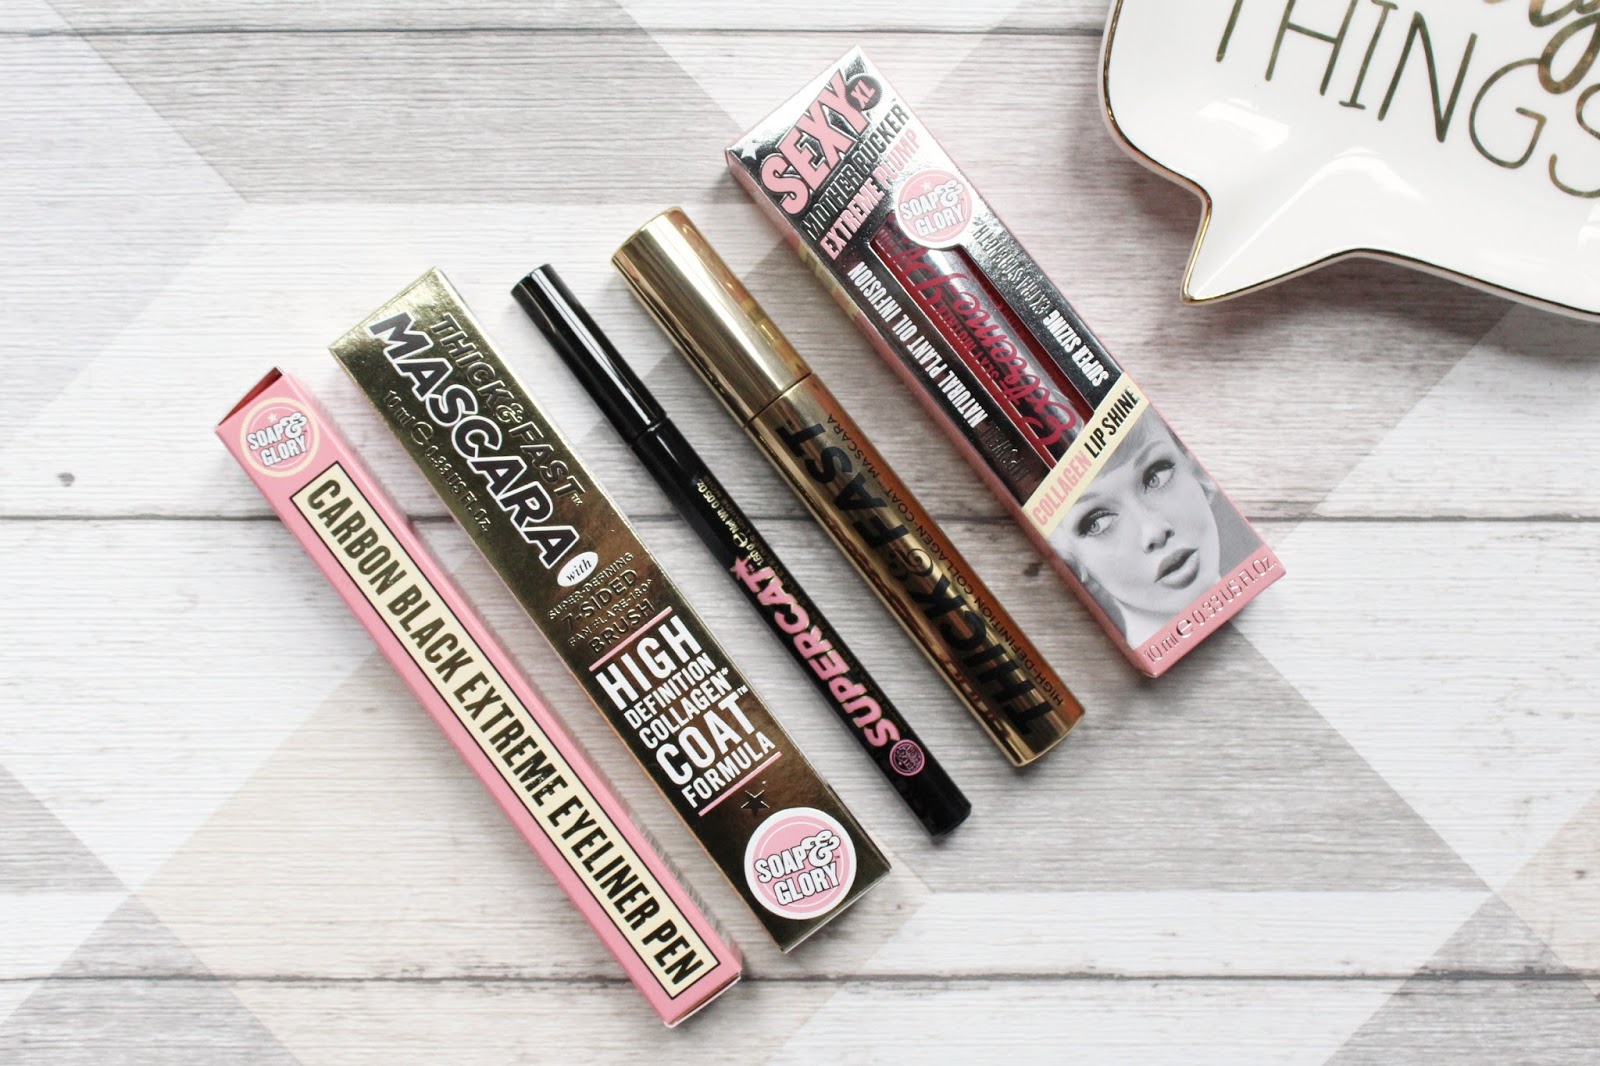 Soap and Glory Gift with Purchase 